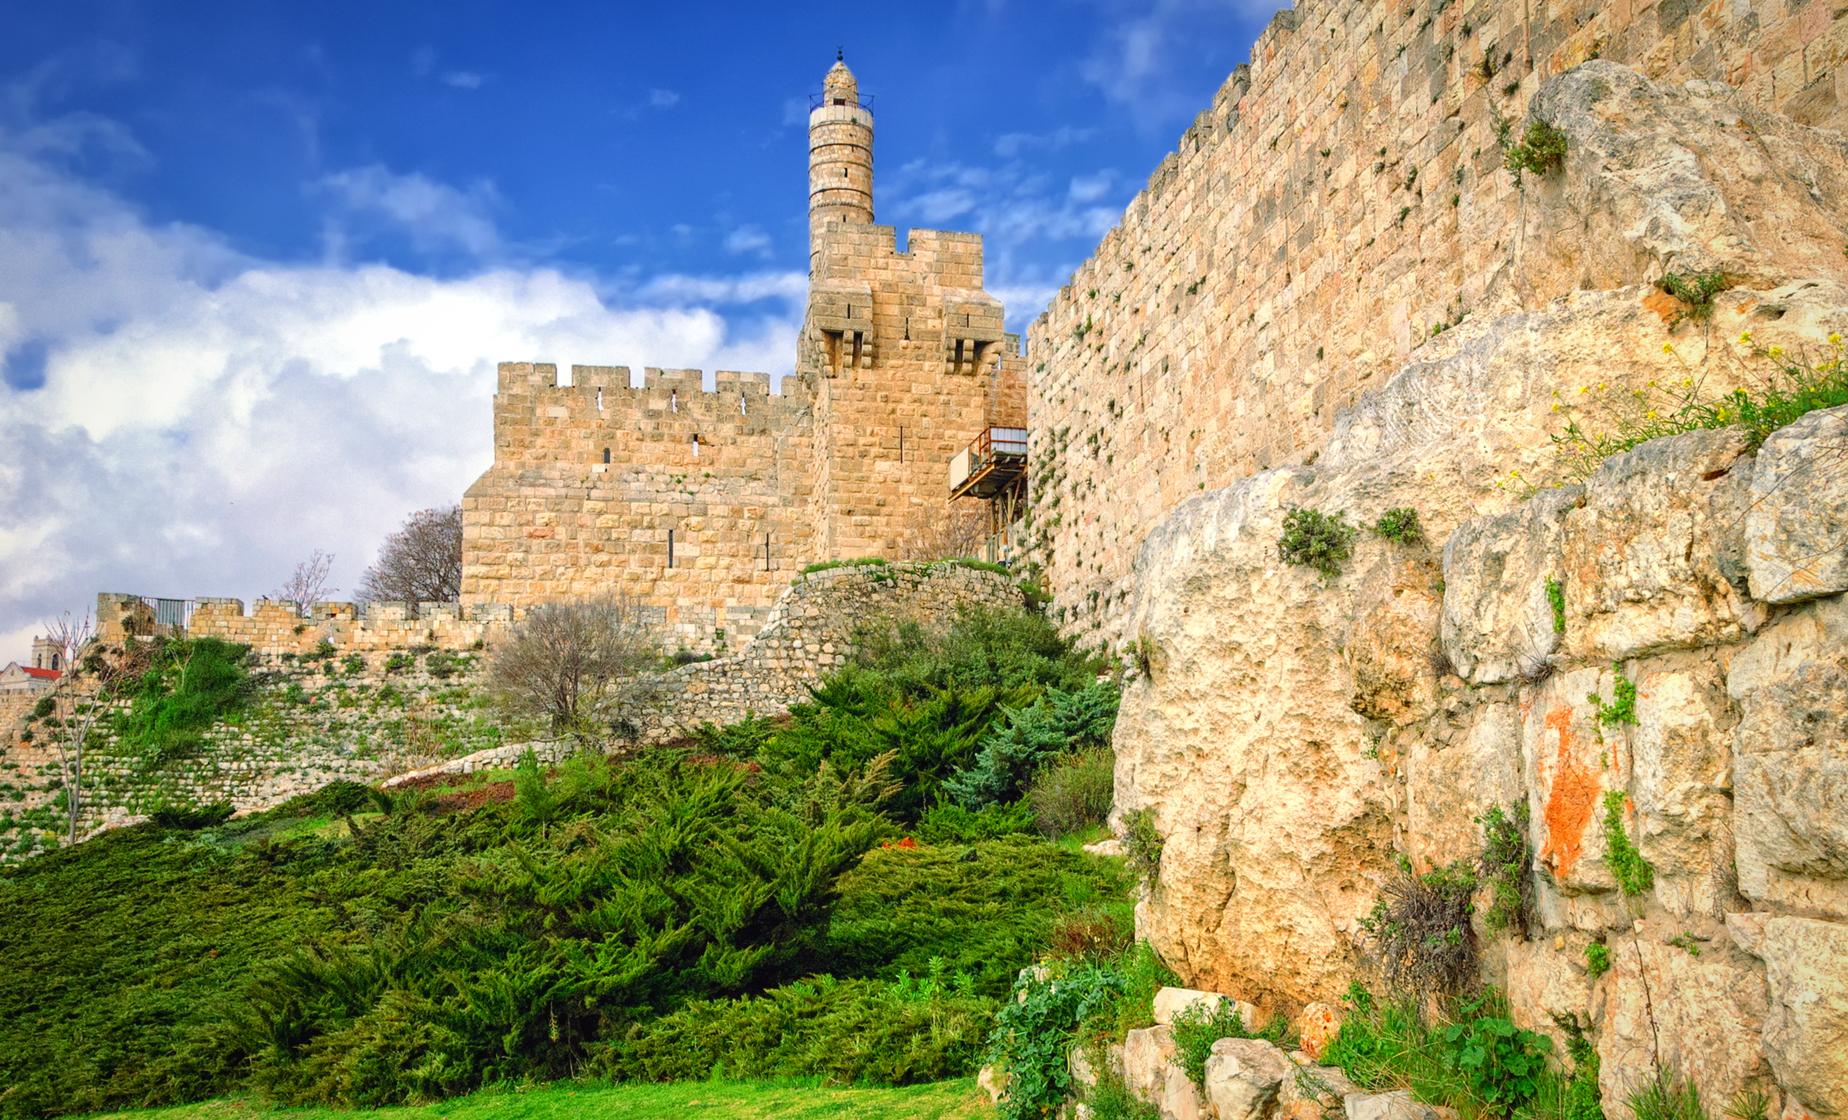 Private Day in Jerusalem Tour from Ashdod (Judean Hills, Tomb of King David)